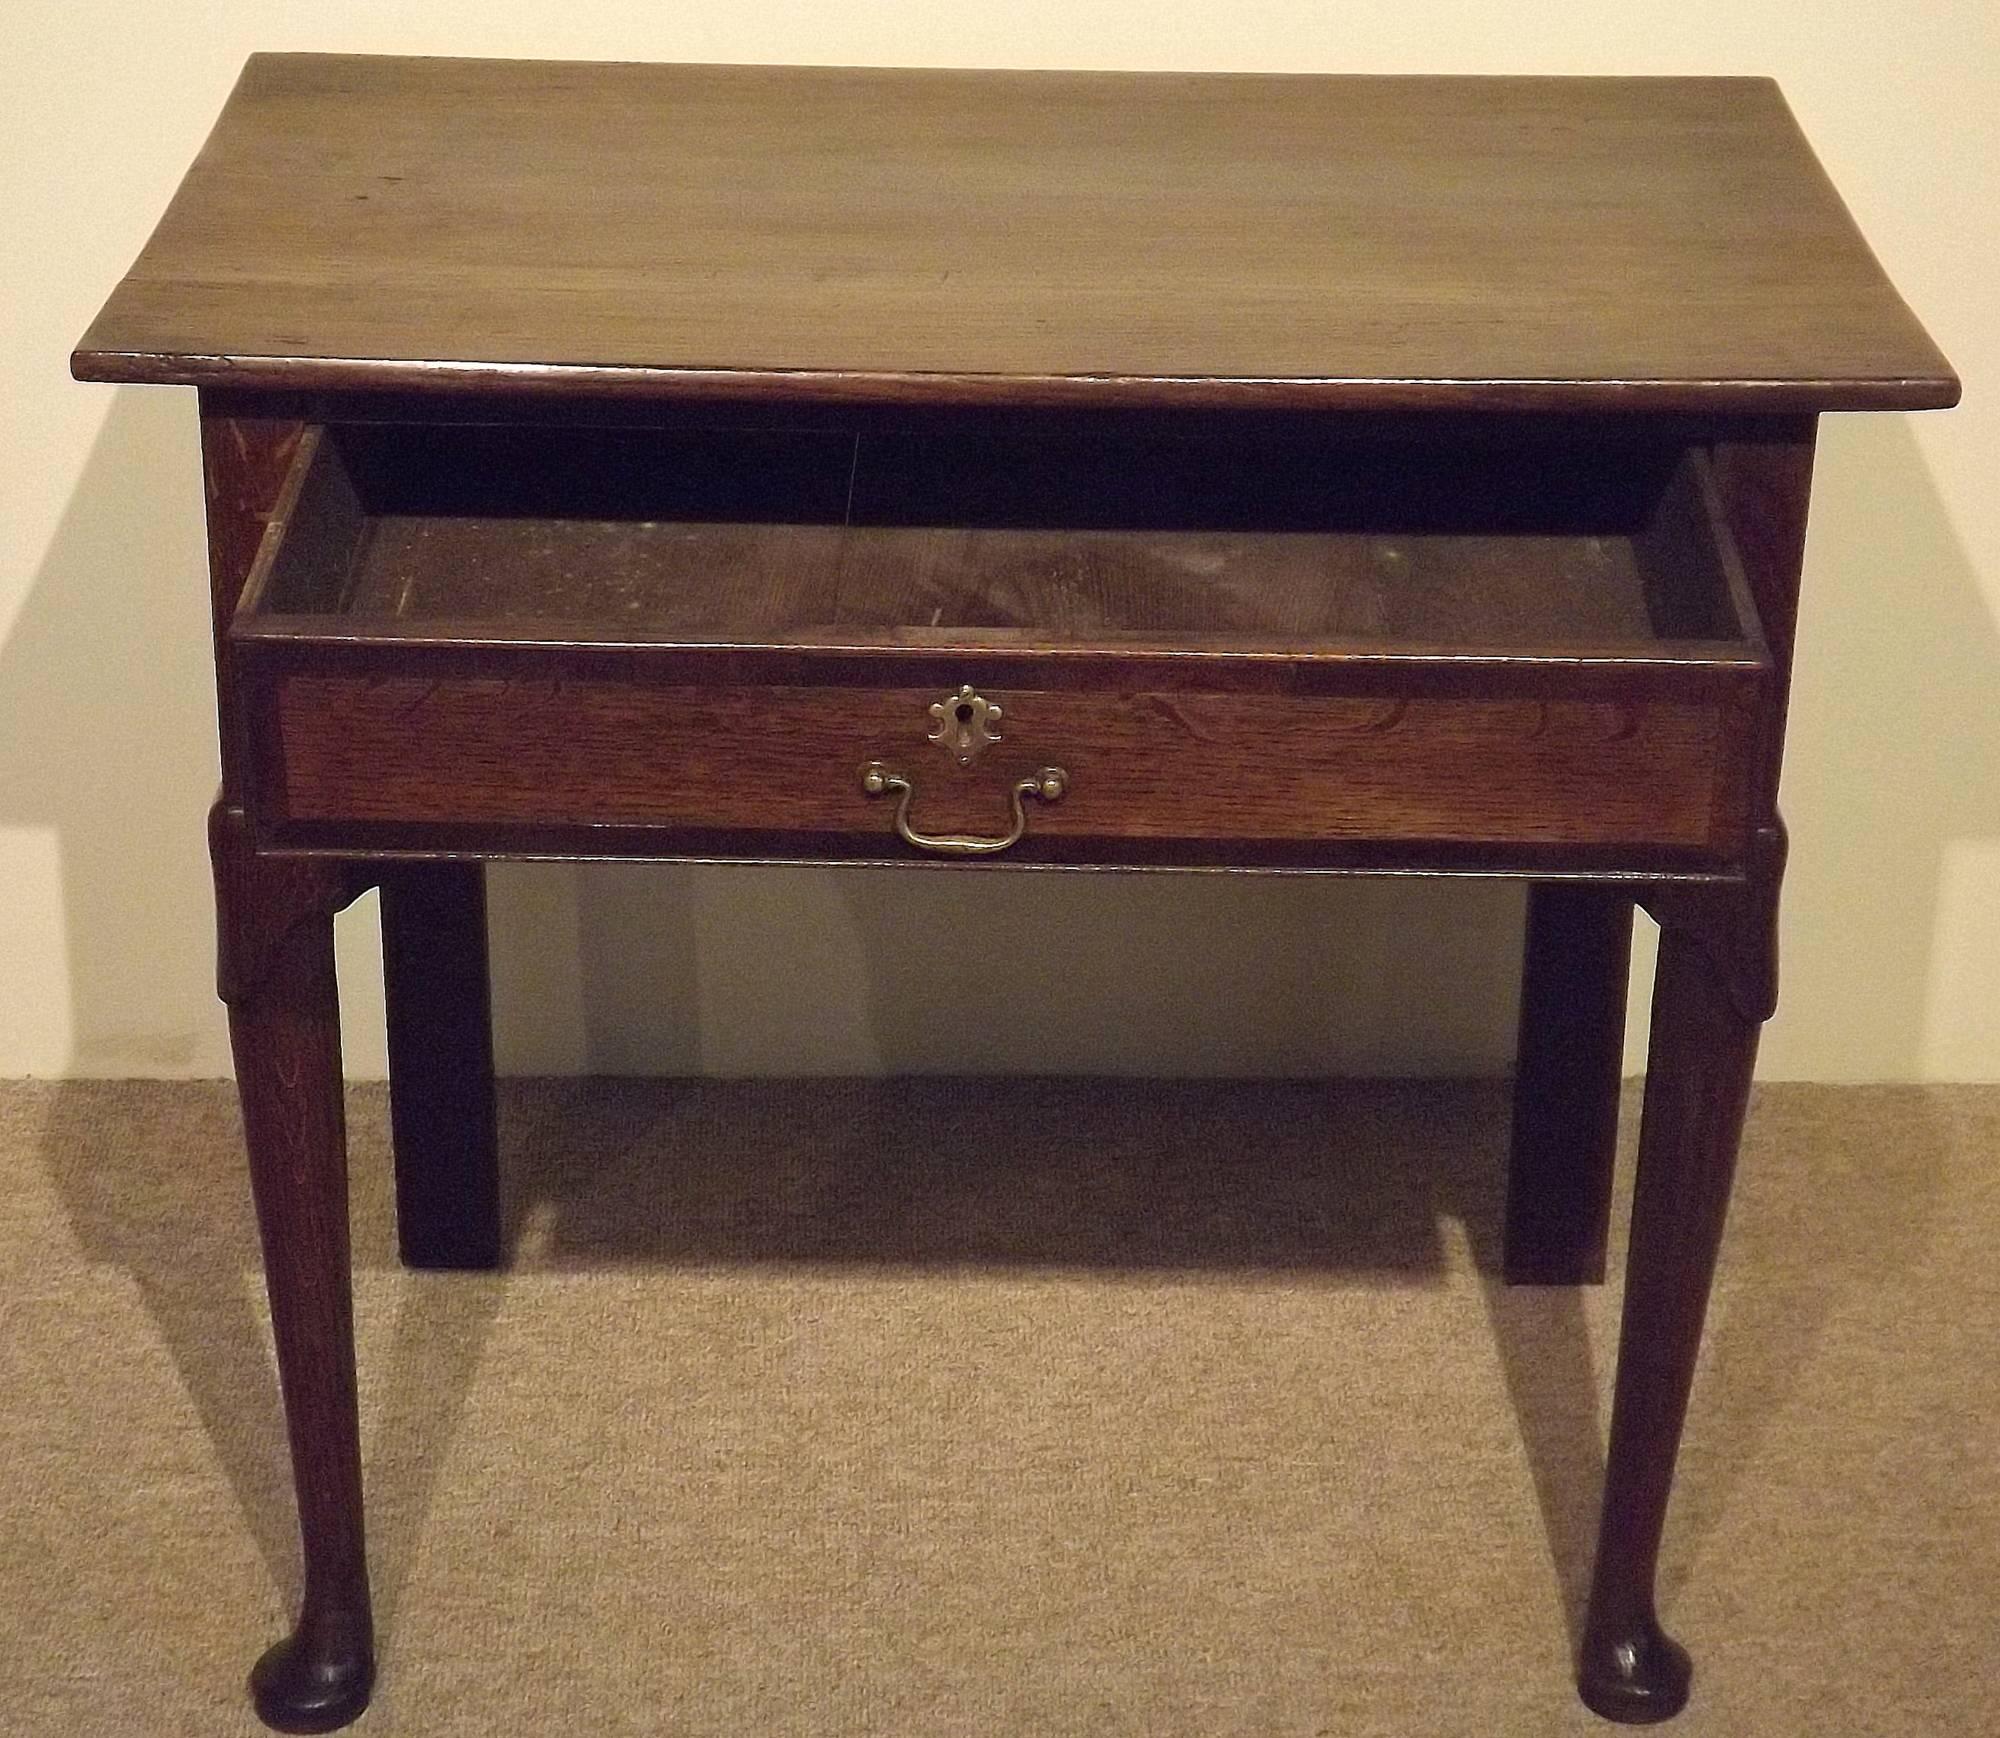 A mid-18th century oak lowboy on pad feet. An attractive Mid-Century country oak lowboy with single frieze drawer capped carved legs and pad feet. Good color and original brass, circa 1750.

All of the items that we advertise for sale have been as